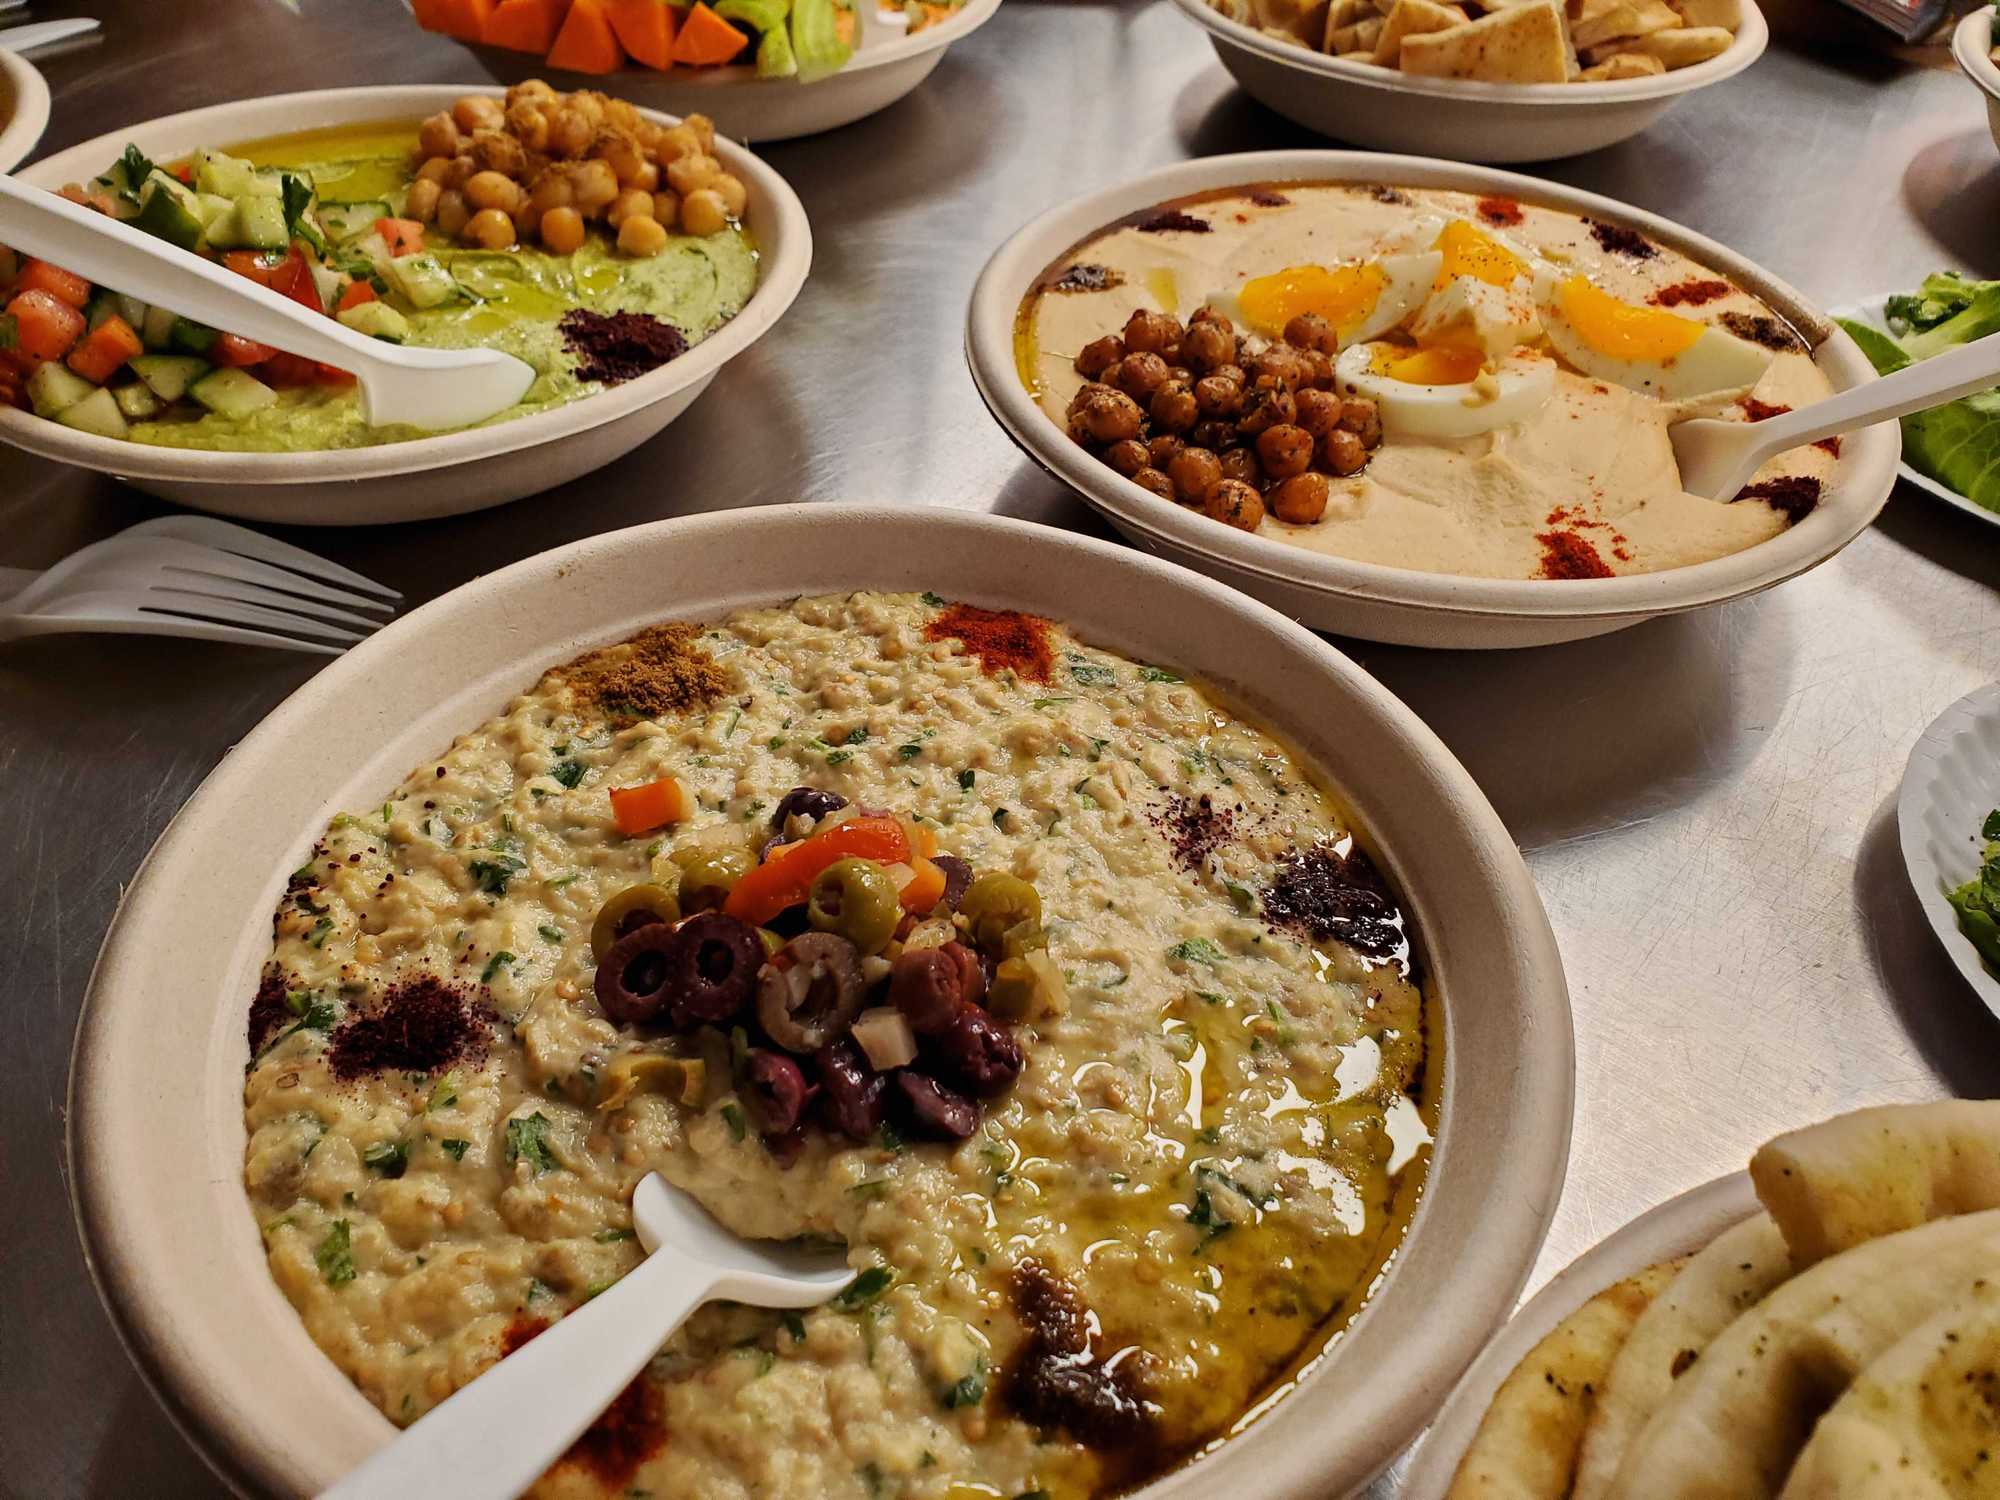 Baba ganoush and hummus from Chickpea, a build-your-own hummus bar at Potluck, Rosedale Center's new food hall